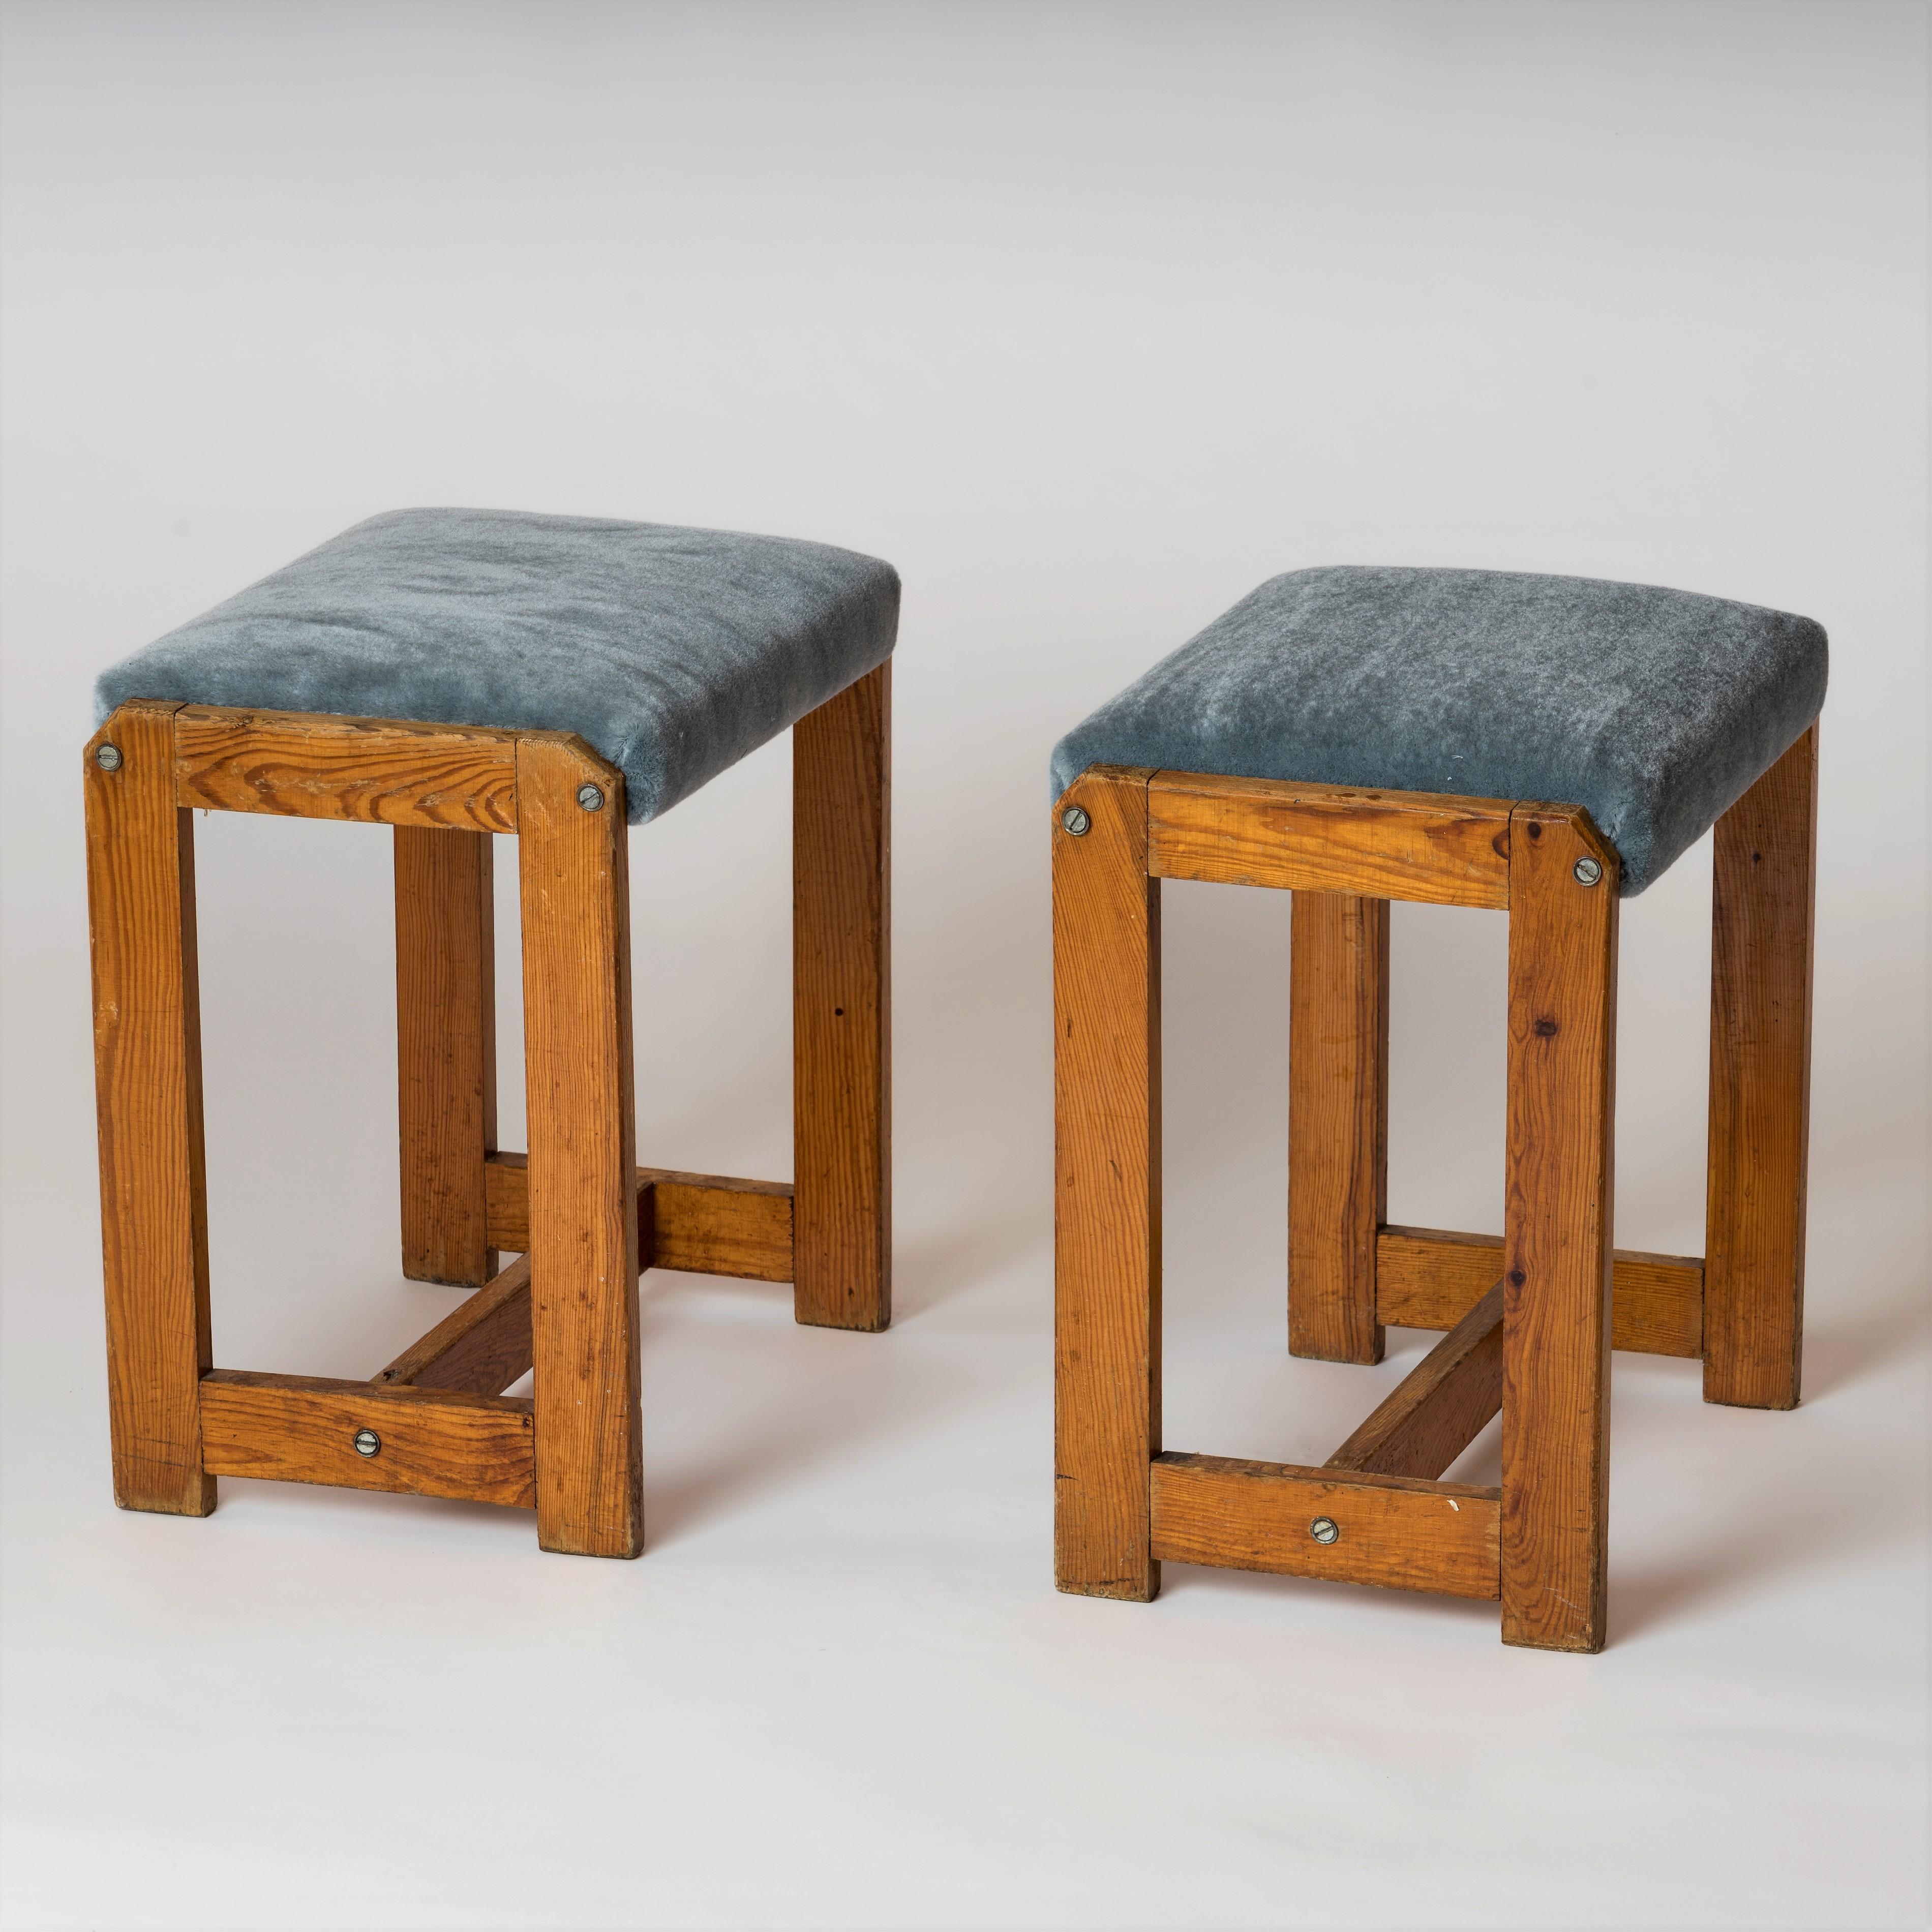 Elegant pair of minimalist solid pinewood stools with fresh Pierre Frey mohair upholstery. In the style of Perriand and Les Arcs Mobilier de Montagne.
In fair vintage condition.
These stools will ship from France and can be returned to either